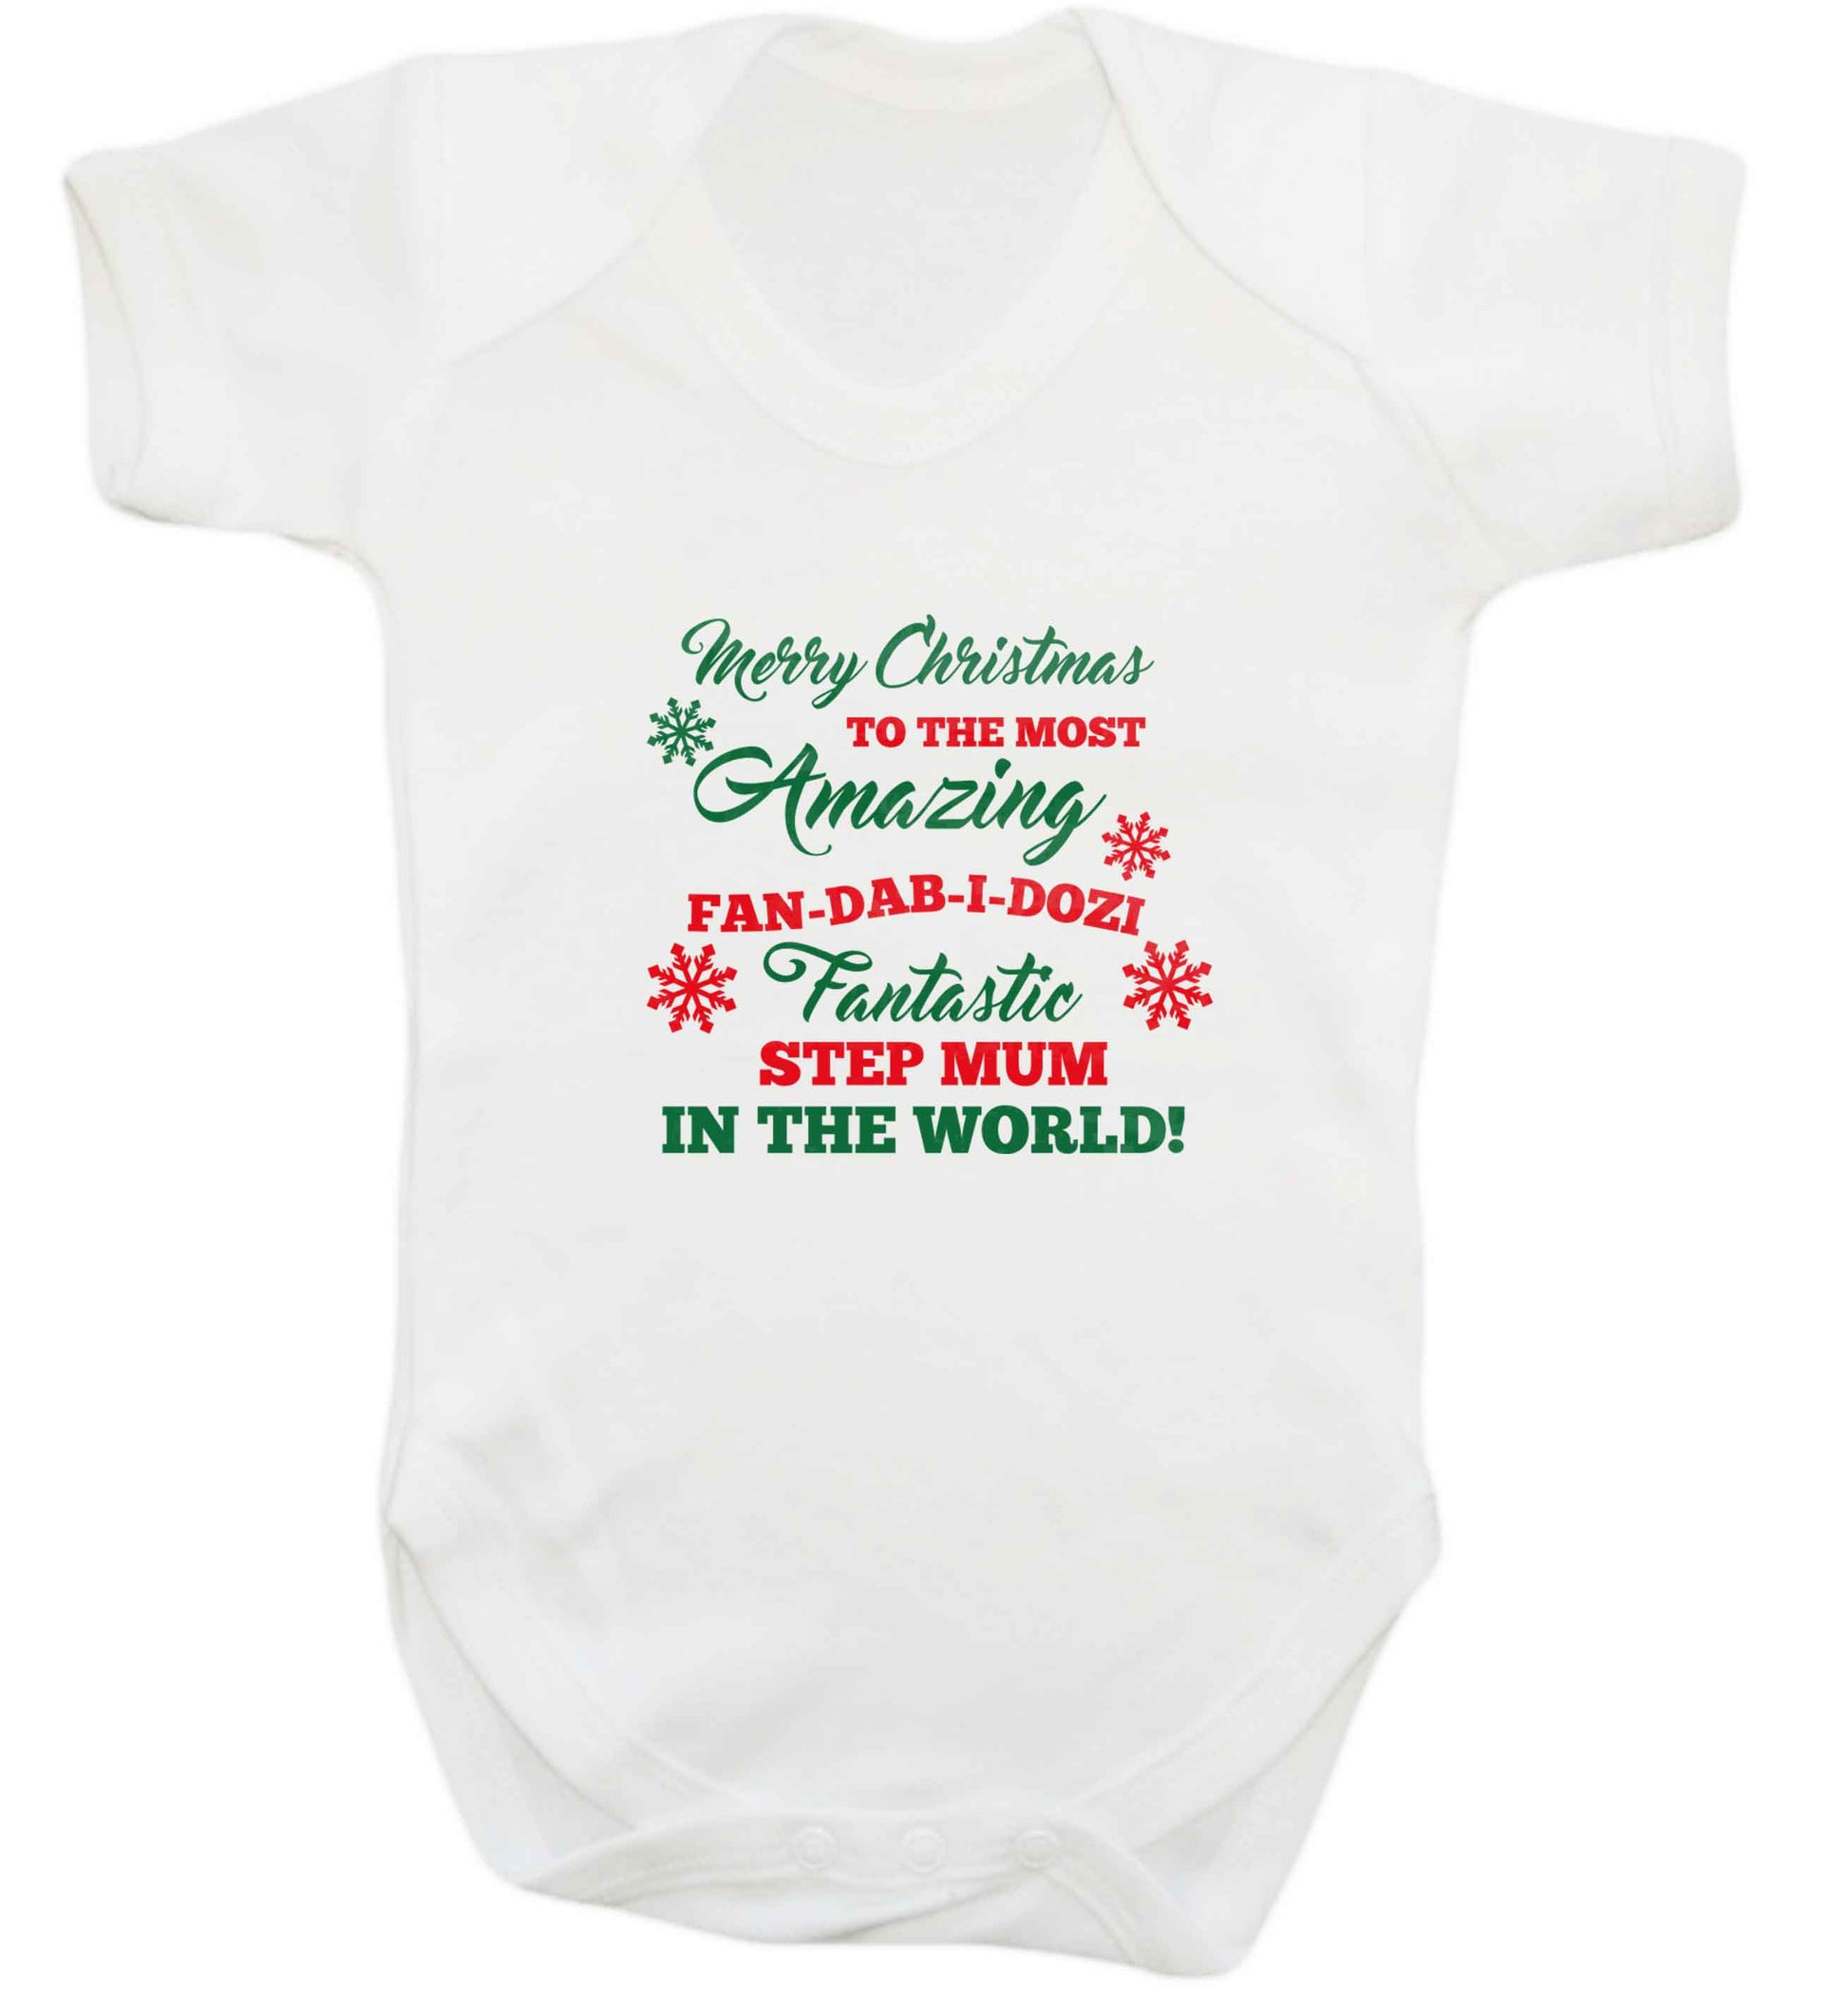 Merry Christmas to the most amazing fan-dab-i-dozi fantasic Step Mum in the world baby vest white 18-24 months